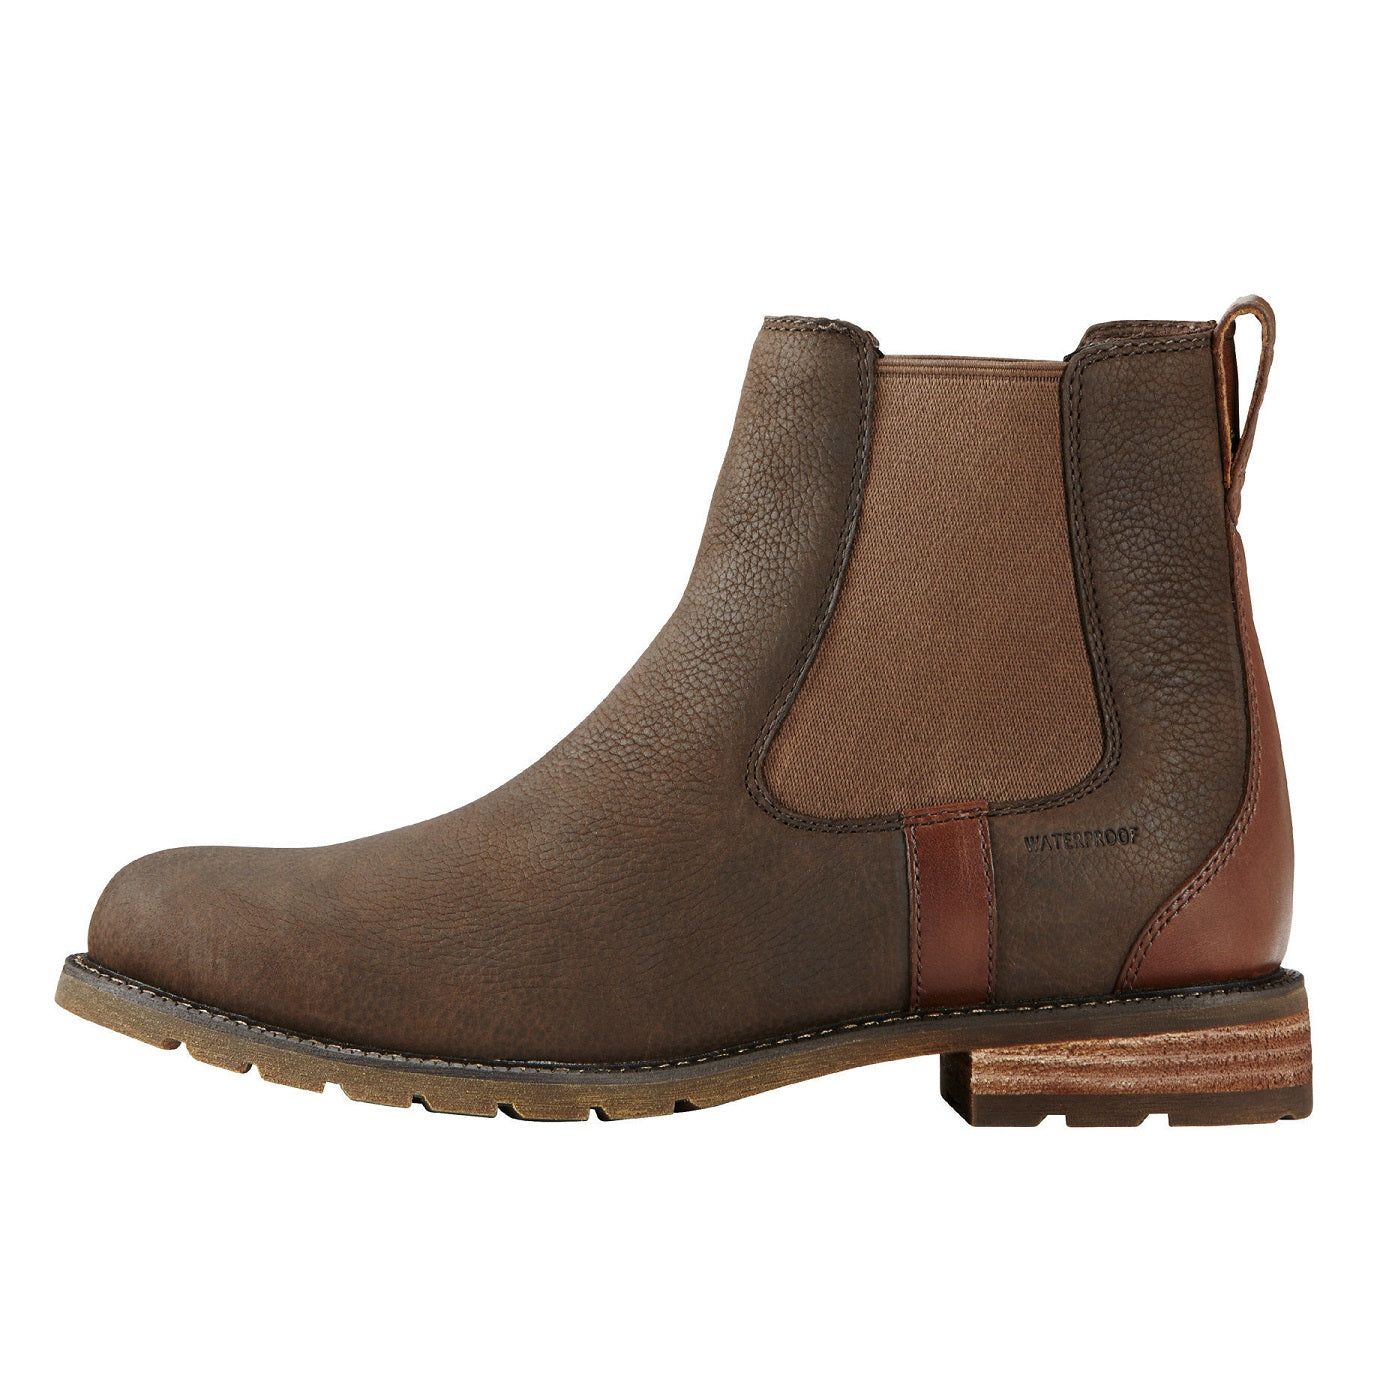 ARIAT Boots - Womens Wexford H2O Waterproof - Java